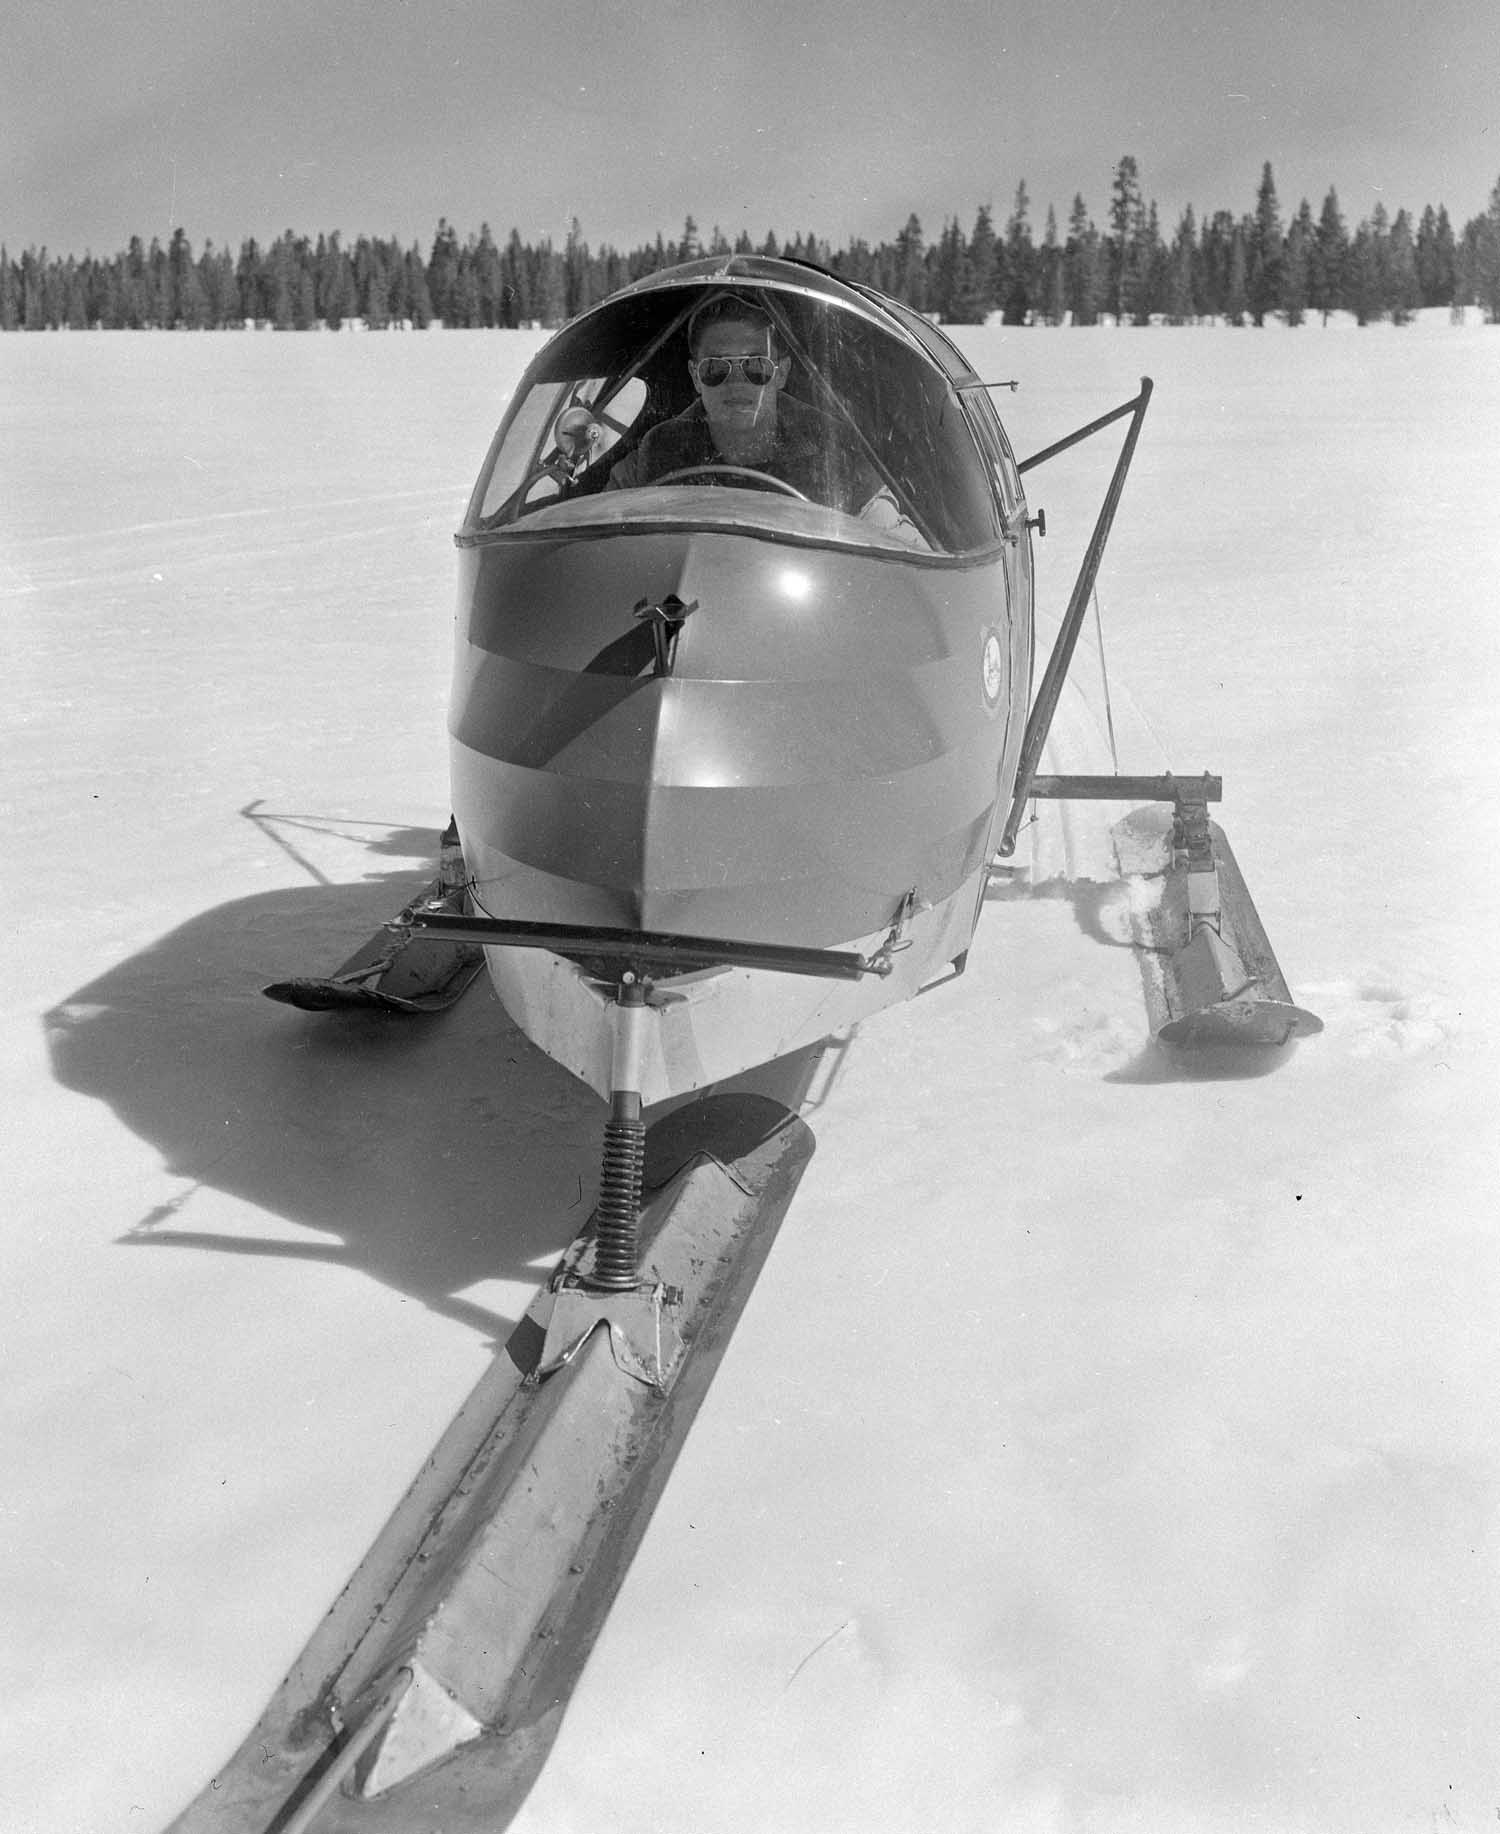 Ranger Bob Richard sits in a snow plane on Yellowstone Lake in the 1950s. The two-person vehicles used a small rear-mounted airplane engine and propeller to glide across ice and snow at high speeds. (Jack Richard photo courtesy of Buffalo Bill Historical Center - click to enlarge)